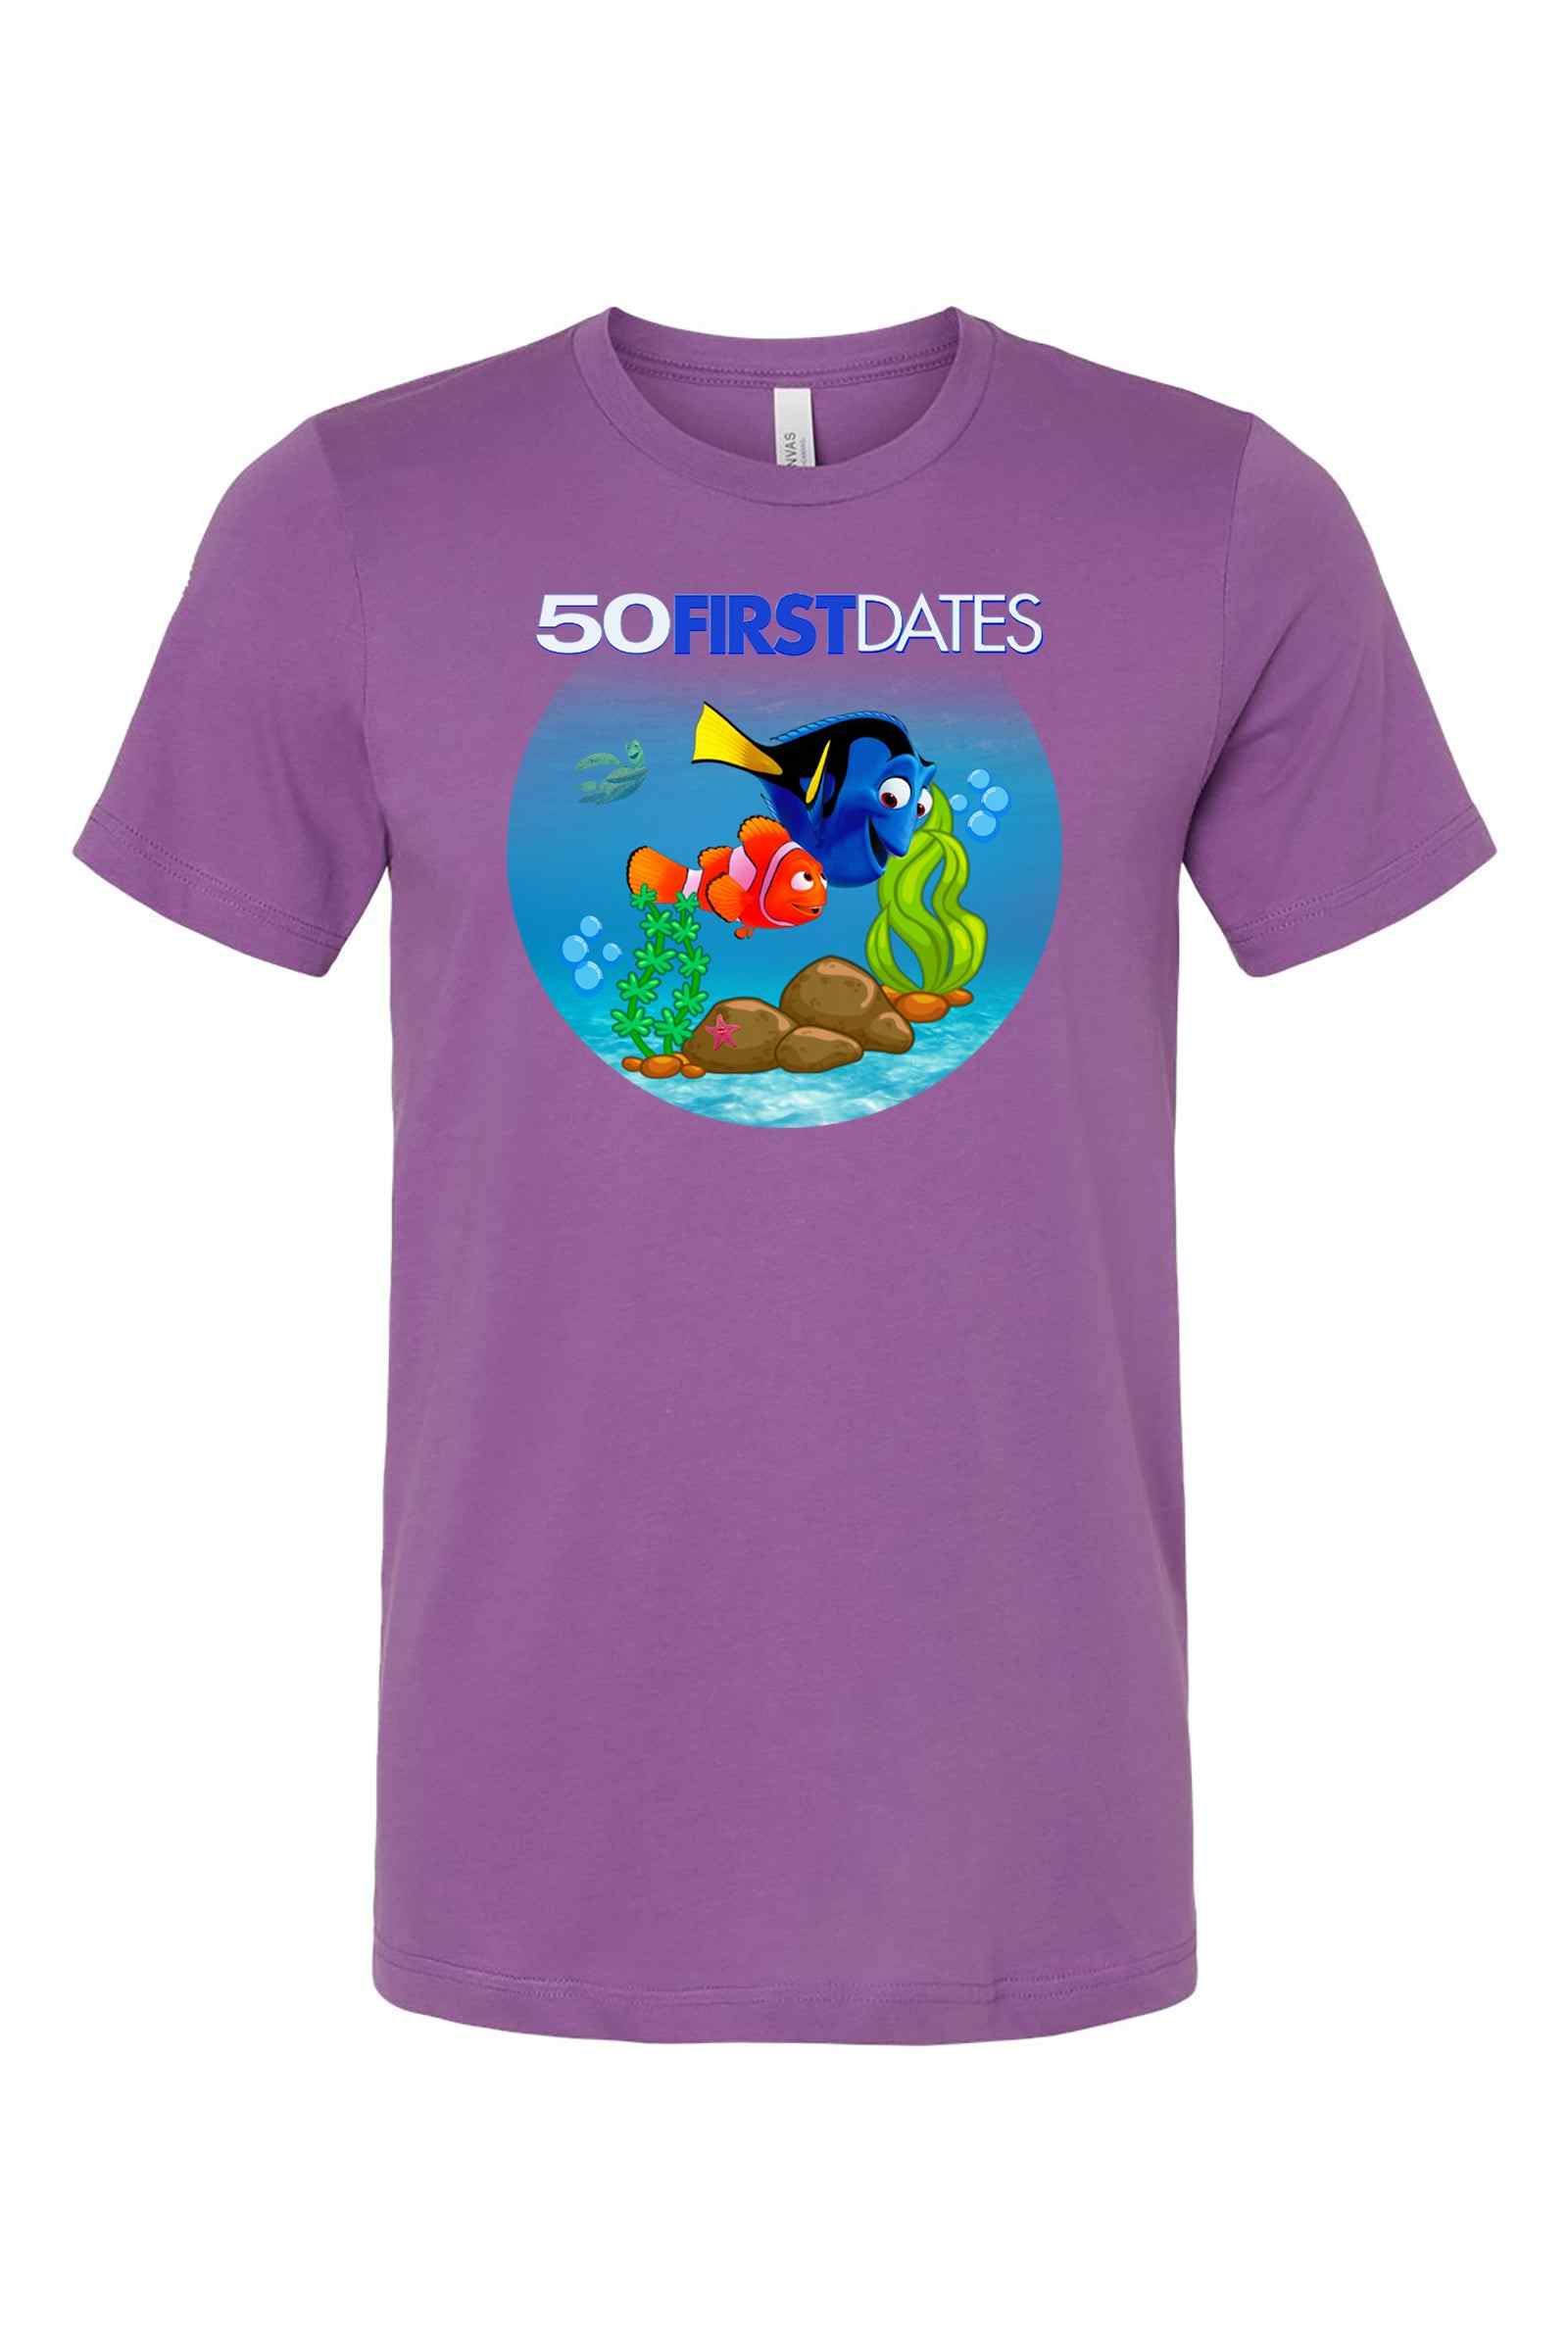 Toddler | Fifty First Dates Dory Shirt | Nemo Shirt | Movie Shirt - Dylan's Tees